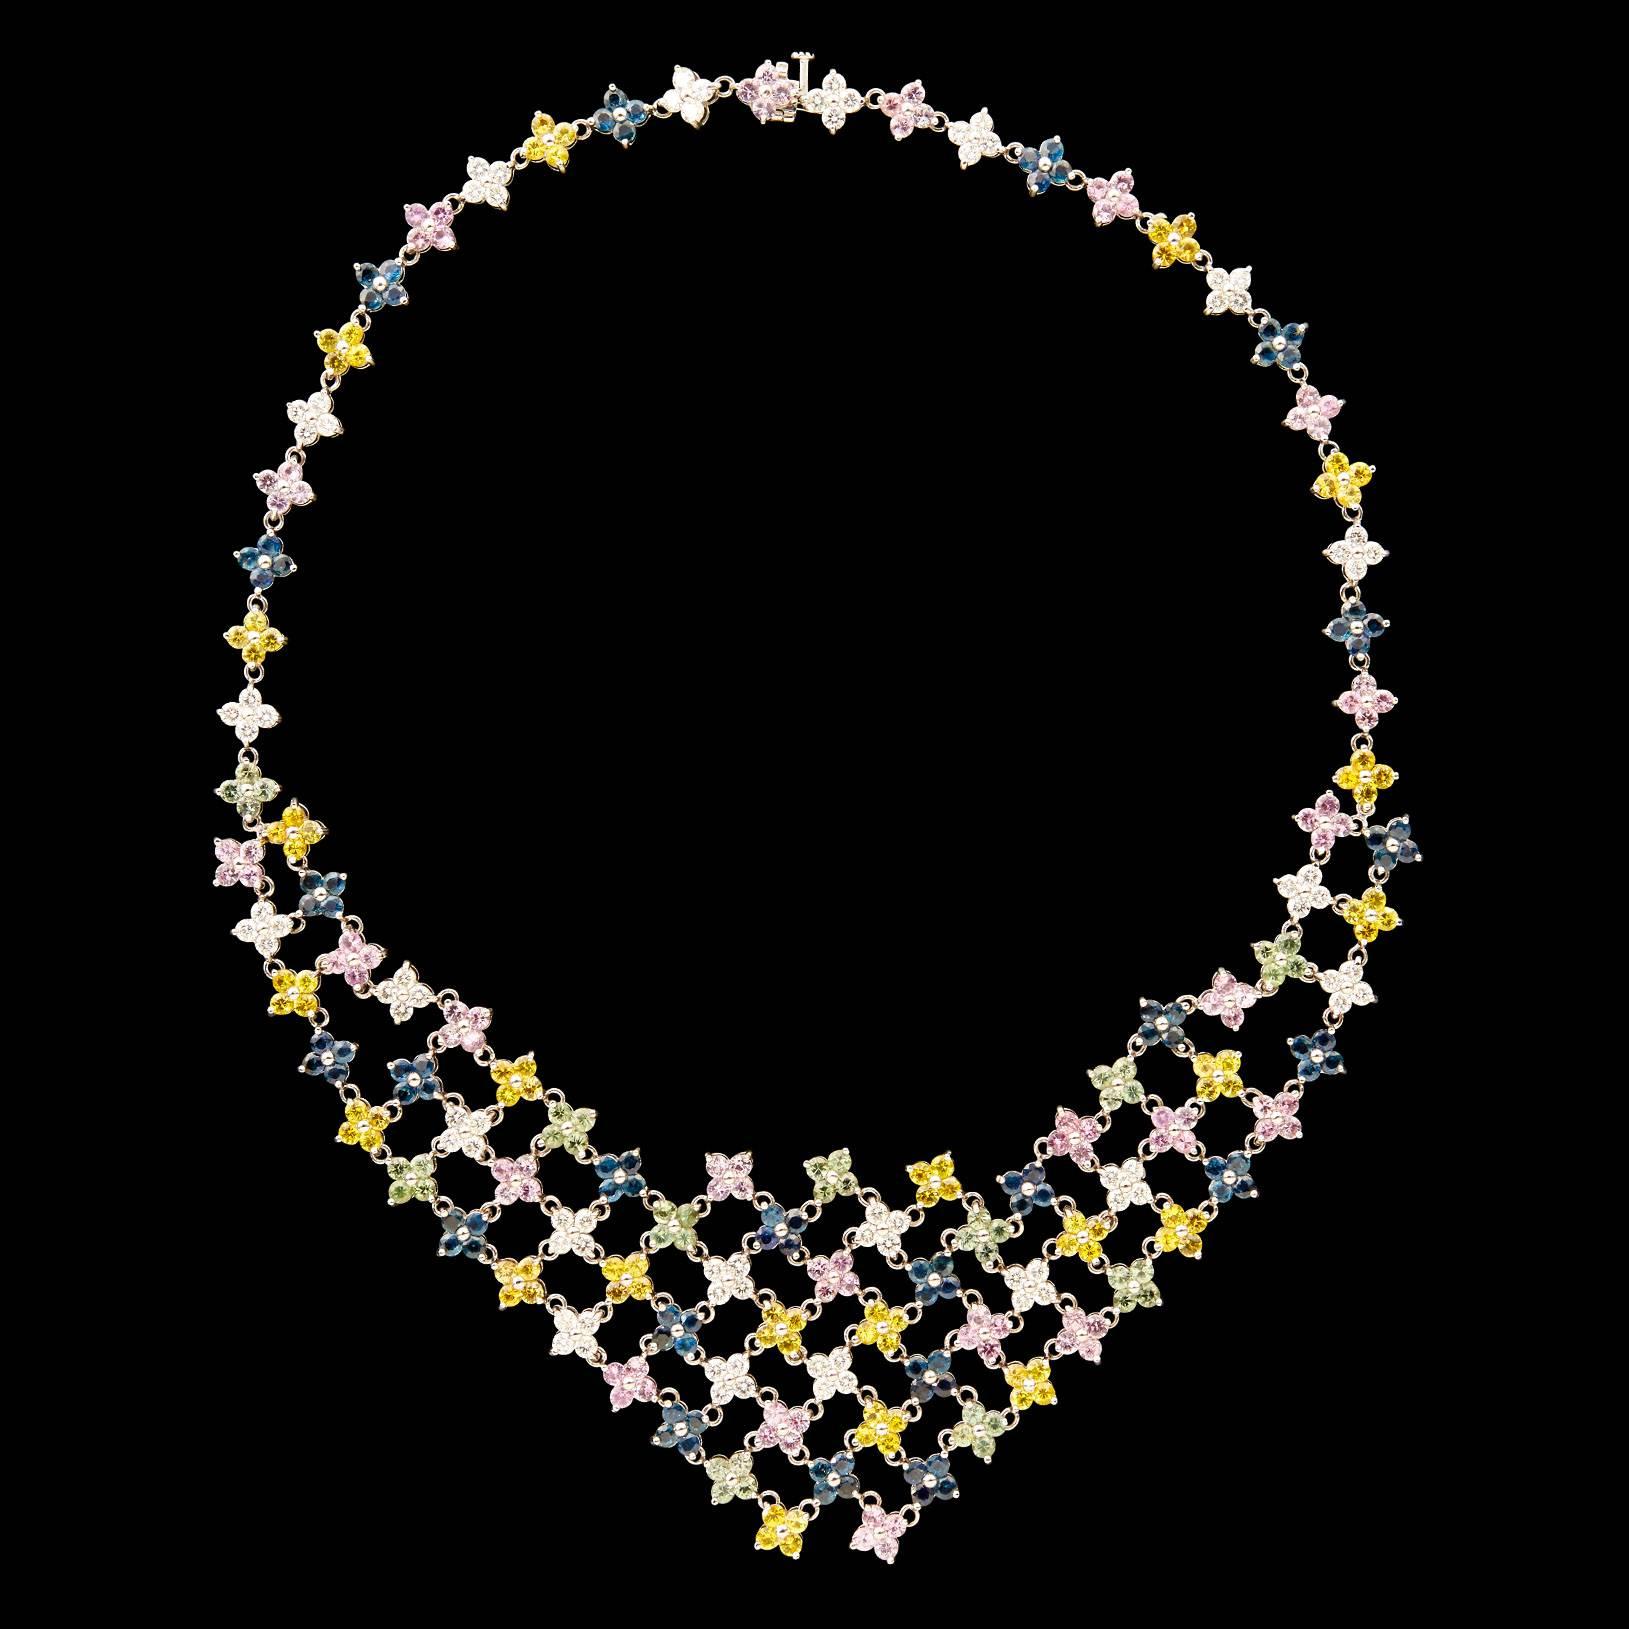 Outstanding Floral Bib Necklace of Sapphires and Diamonds Set in 18Kt White Gold. The colorful gemstone flowers comprised of 9.10 carat total weight  diamonds, 12.32 carat total weight blue sapphires, 12.32 carat total weight yellow sapphires, 12.88